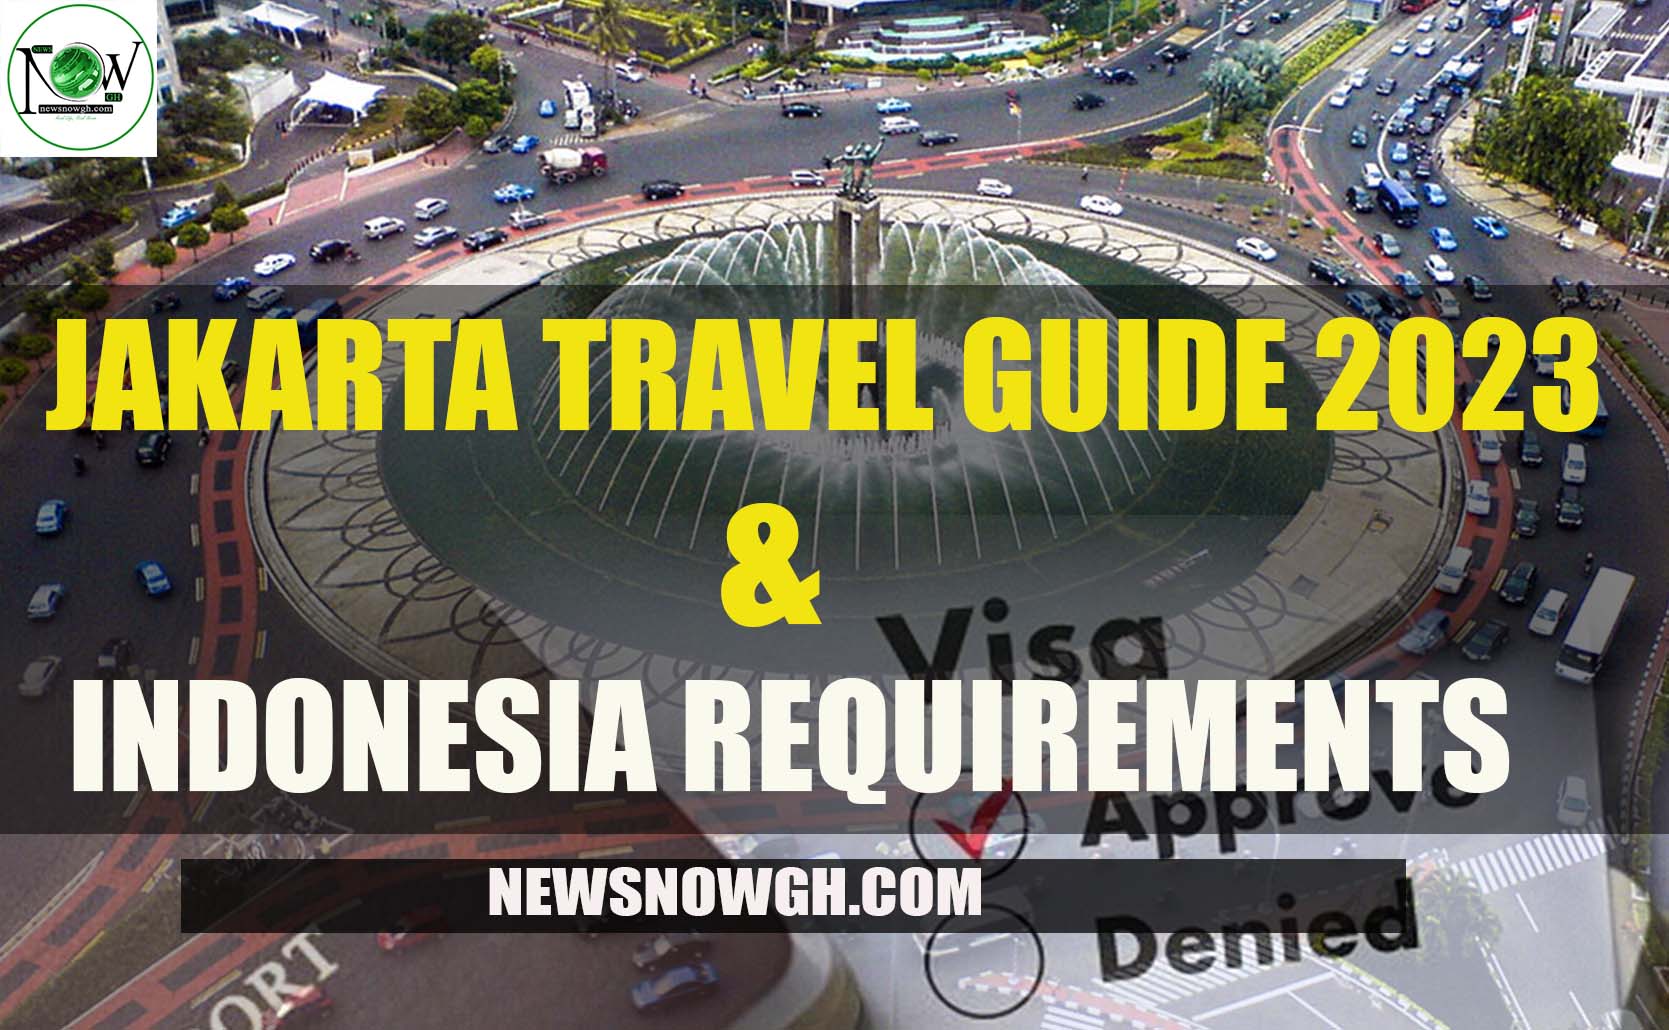 indonesia travel requirements 2023 for malaysian